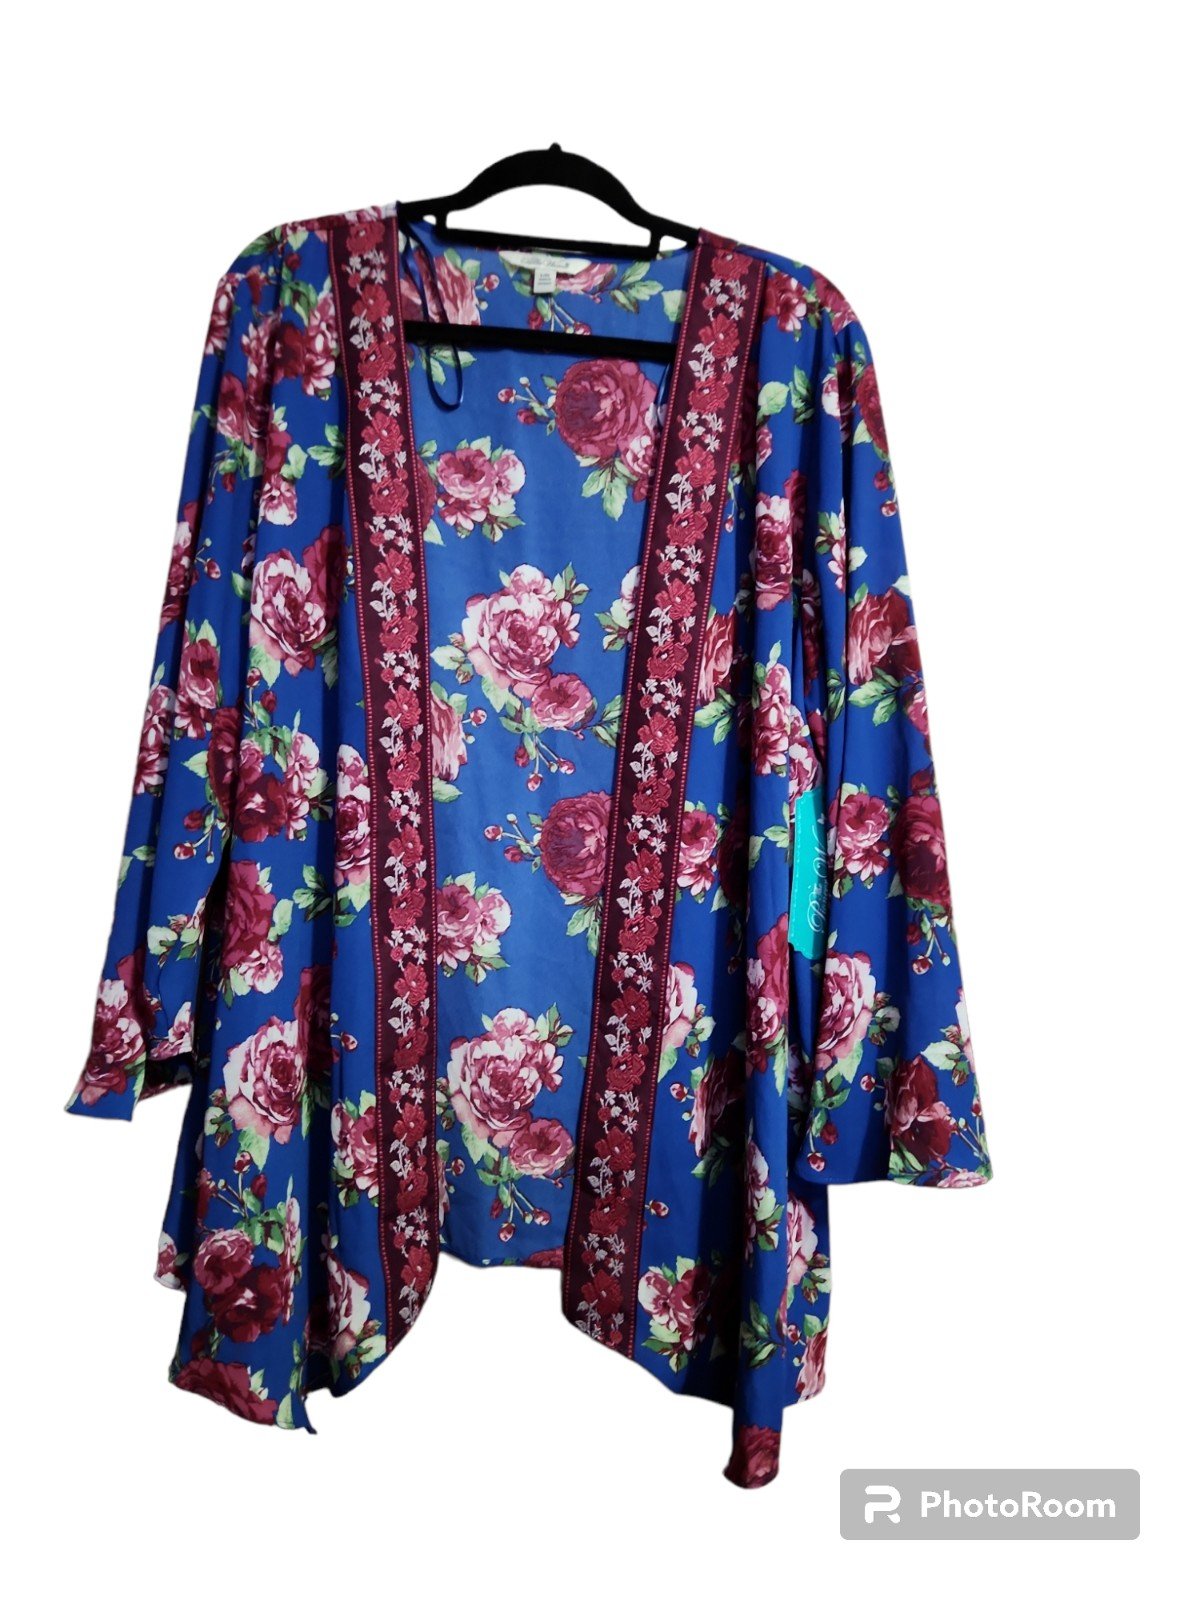 Buy Pioneer Woman open front blue floral kimono L/XL new oNyQkSOT1 Fashion